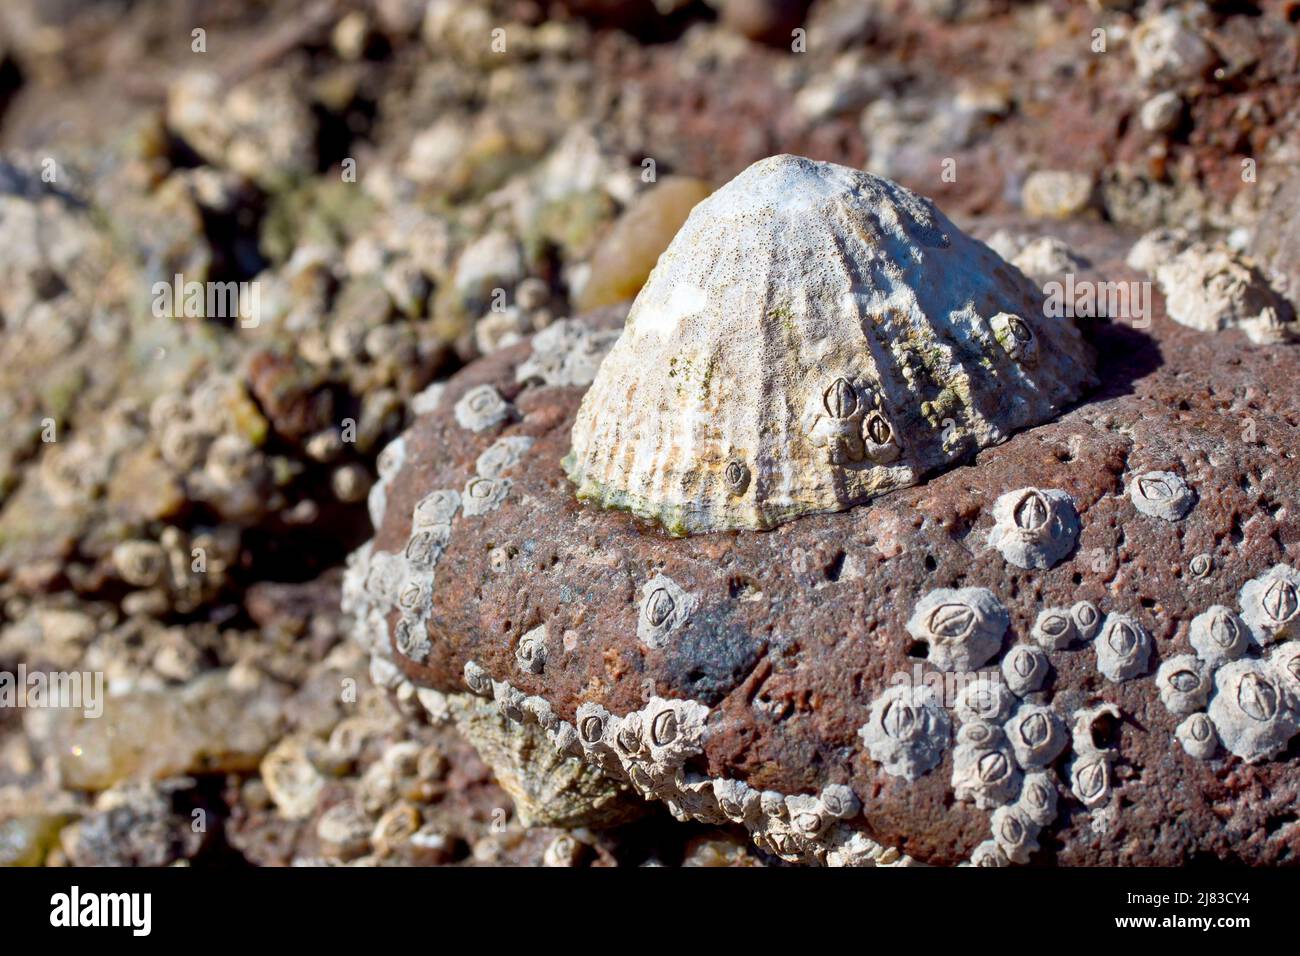 Close up of a limpet (patella vulgata) attached to a barnacle encrusted red rock on the beach at low tide. Stock Photo